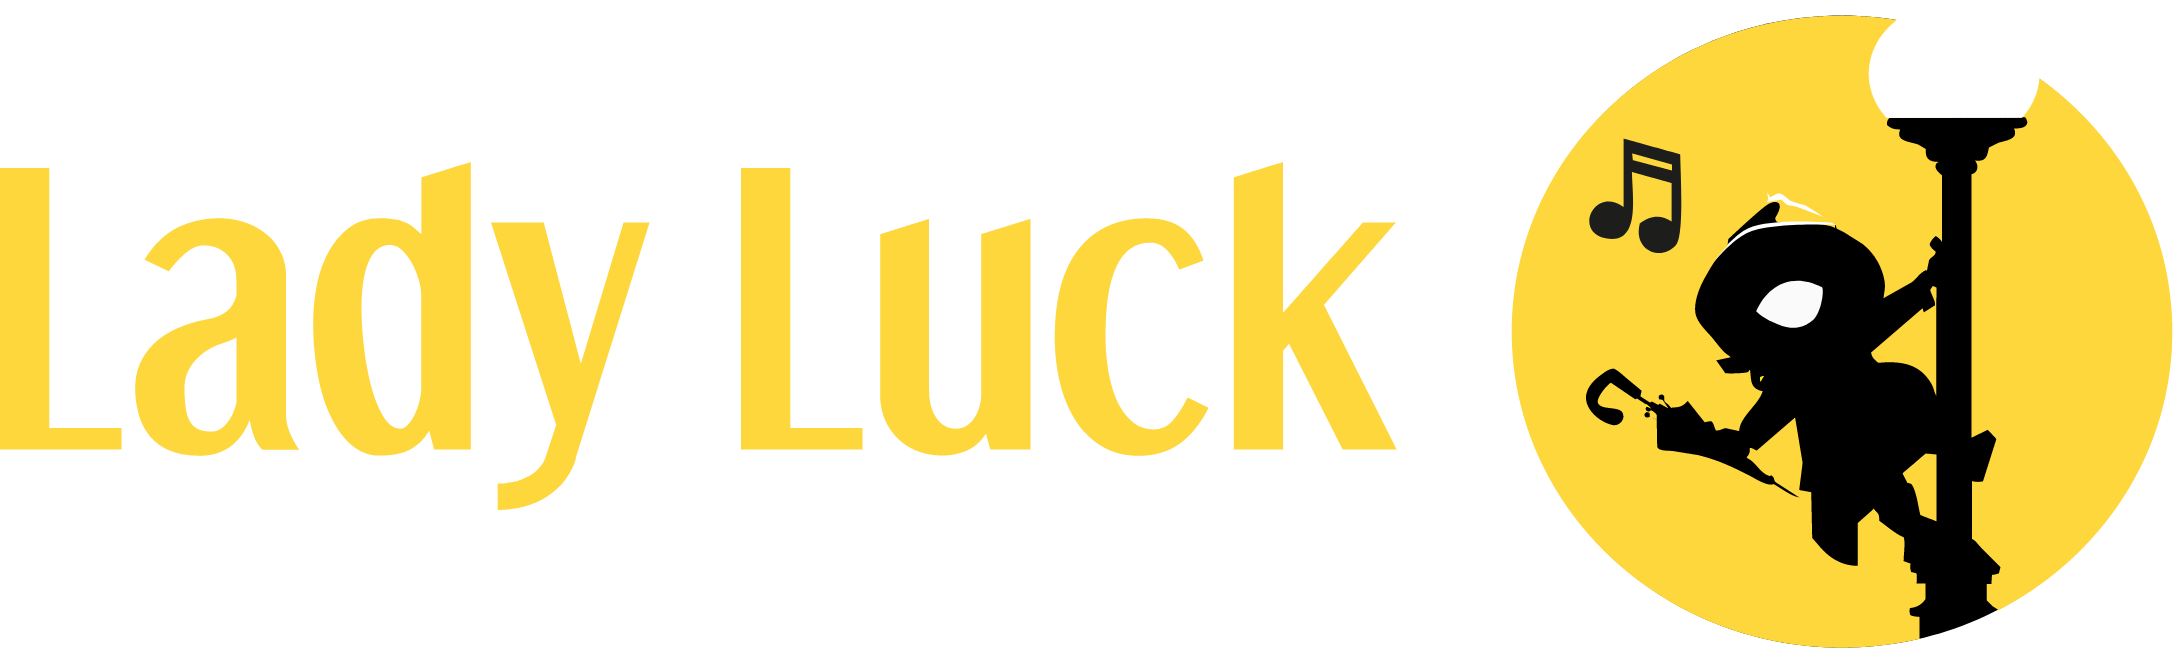 LL Lucky Games logo large for dark backgrounds (transparent PNG)